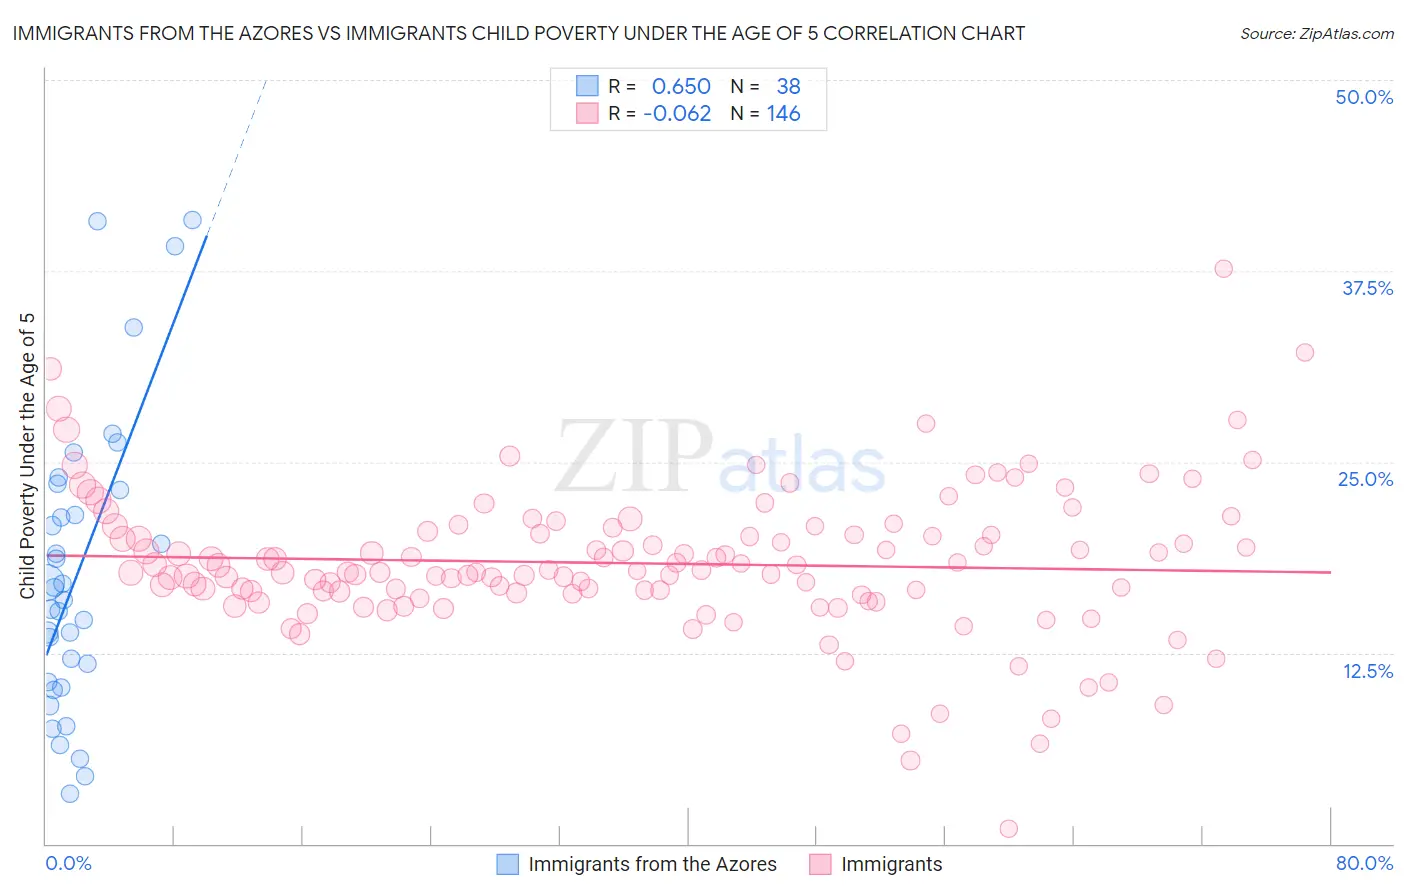 Immigrants from the Azores vs Immigrants Child Poverty Under the Age of 5